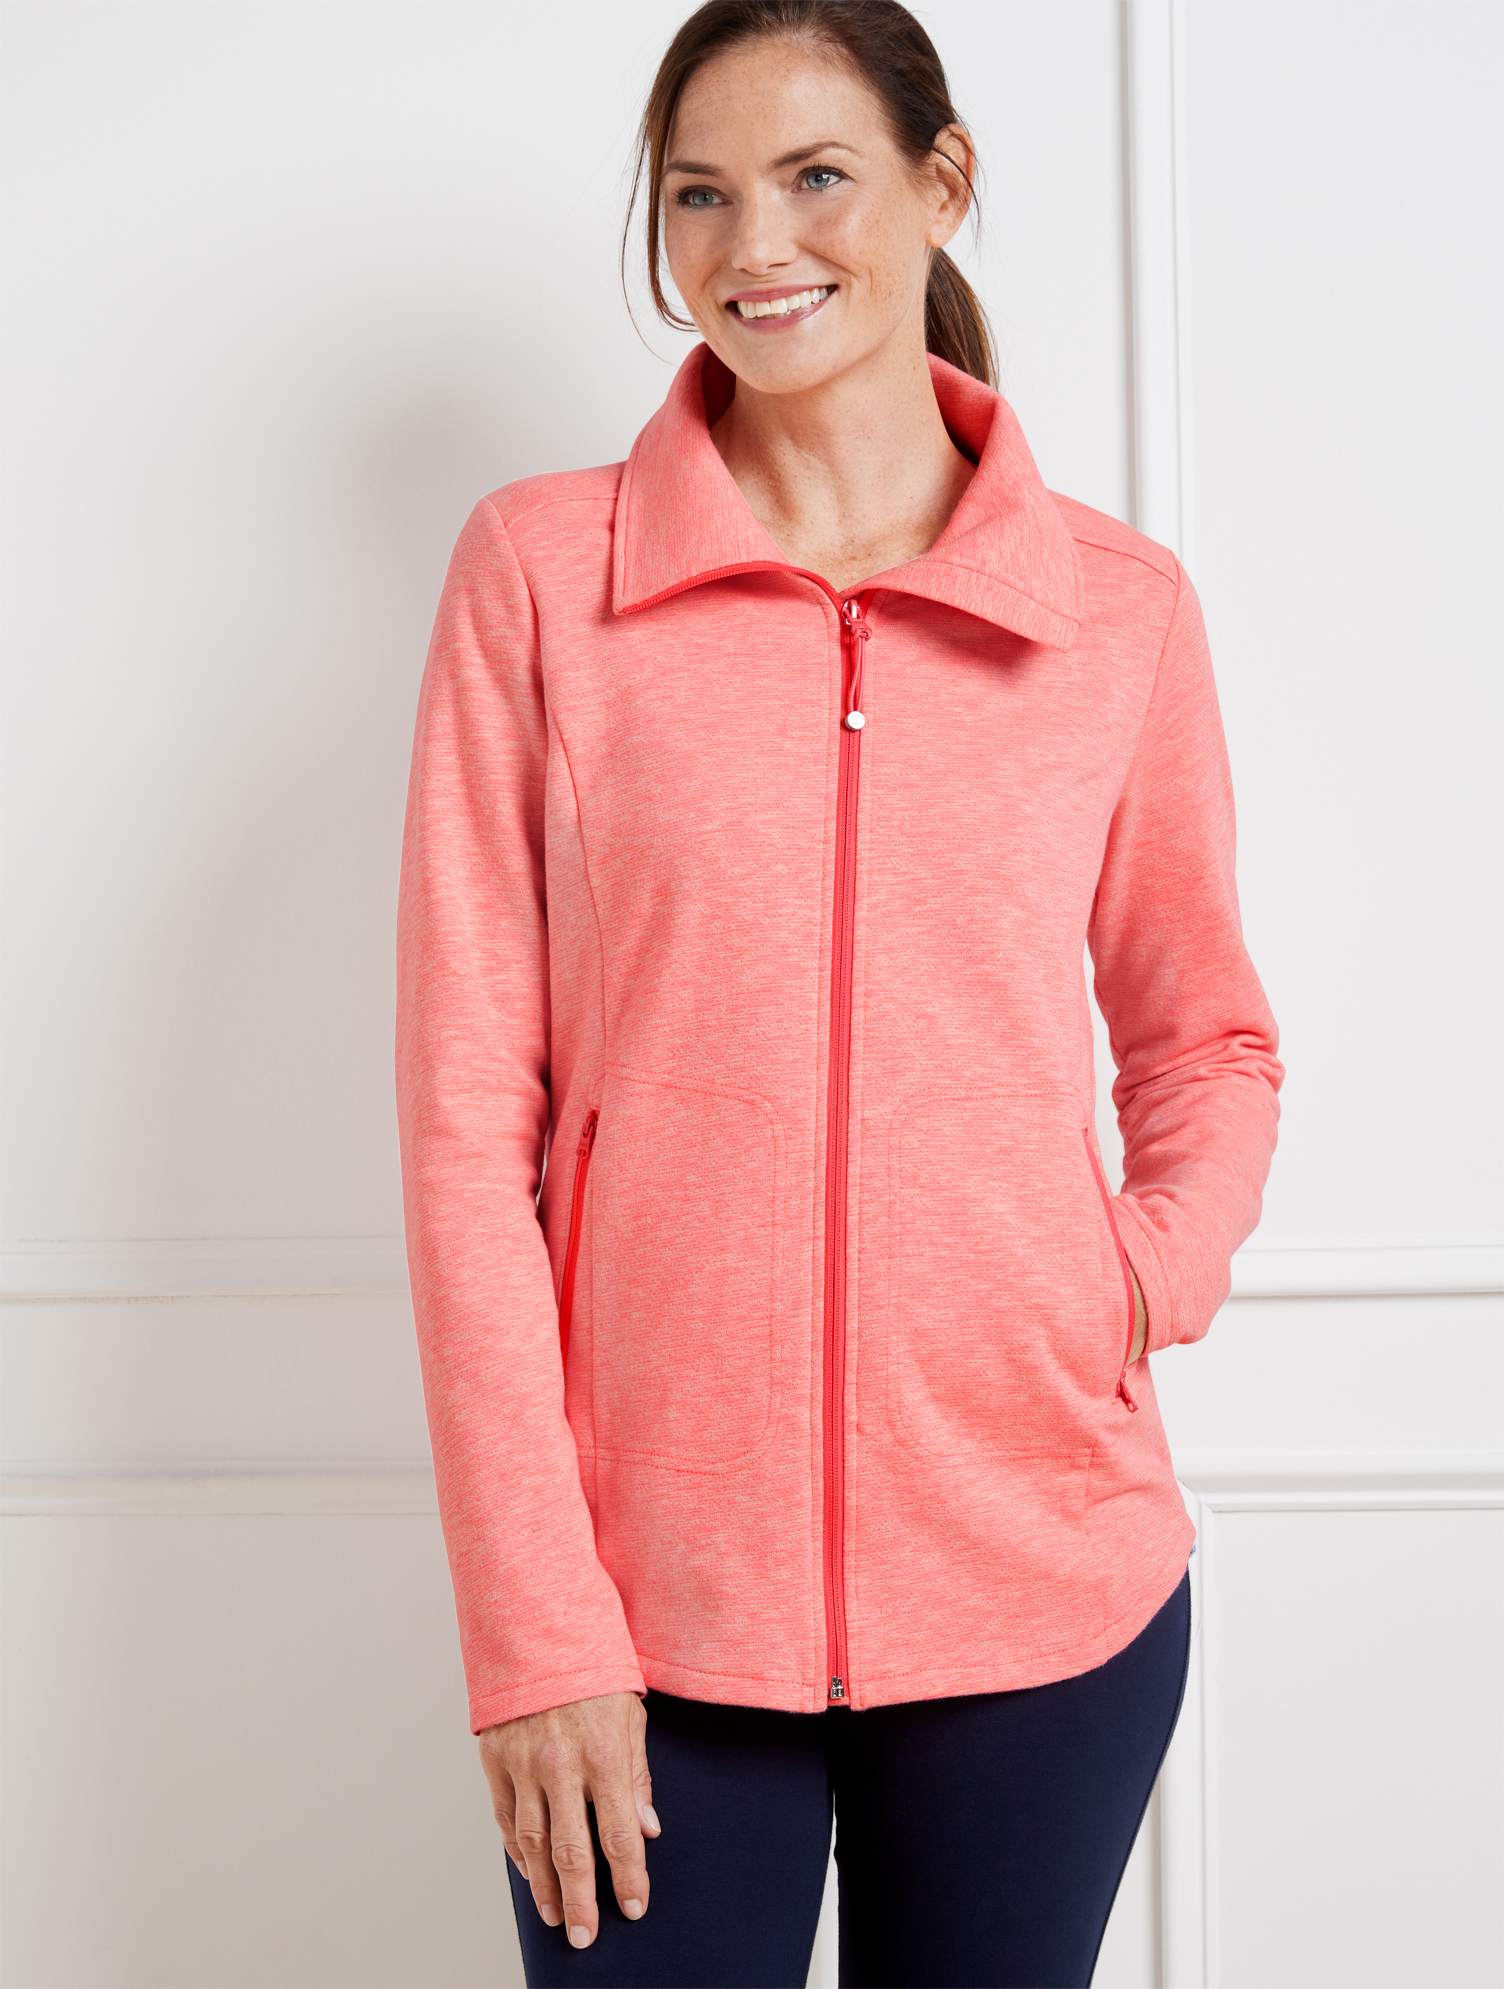 Talbots Cozy Brushed Terrain Jacket - Coral Flame/ivory - Medium  In Coral Flame,ivory